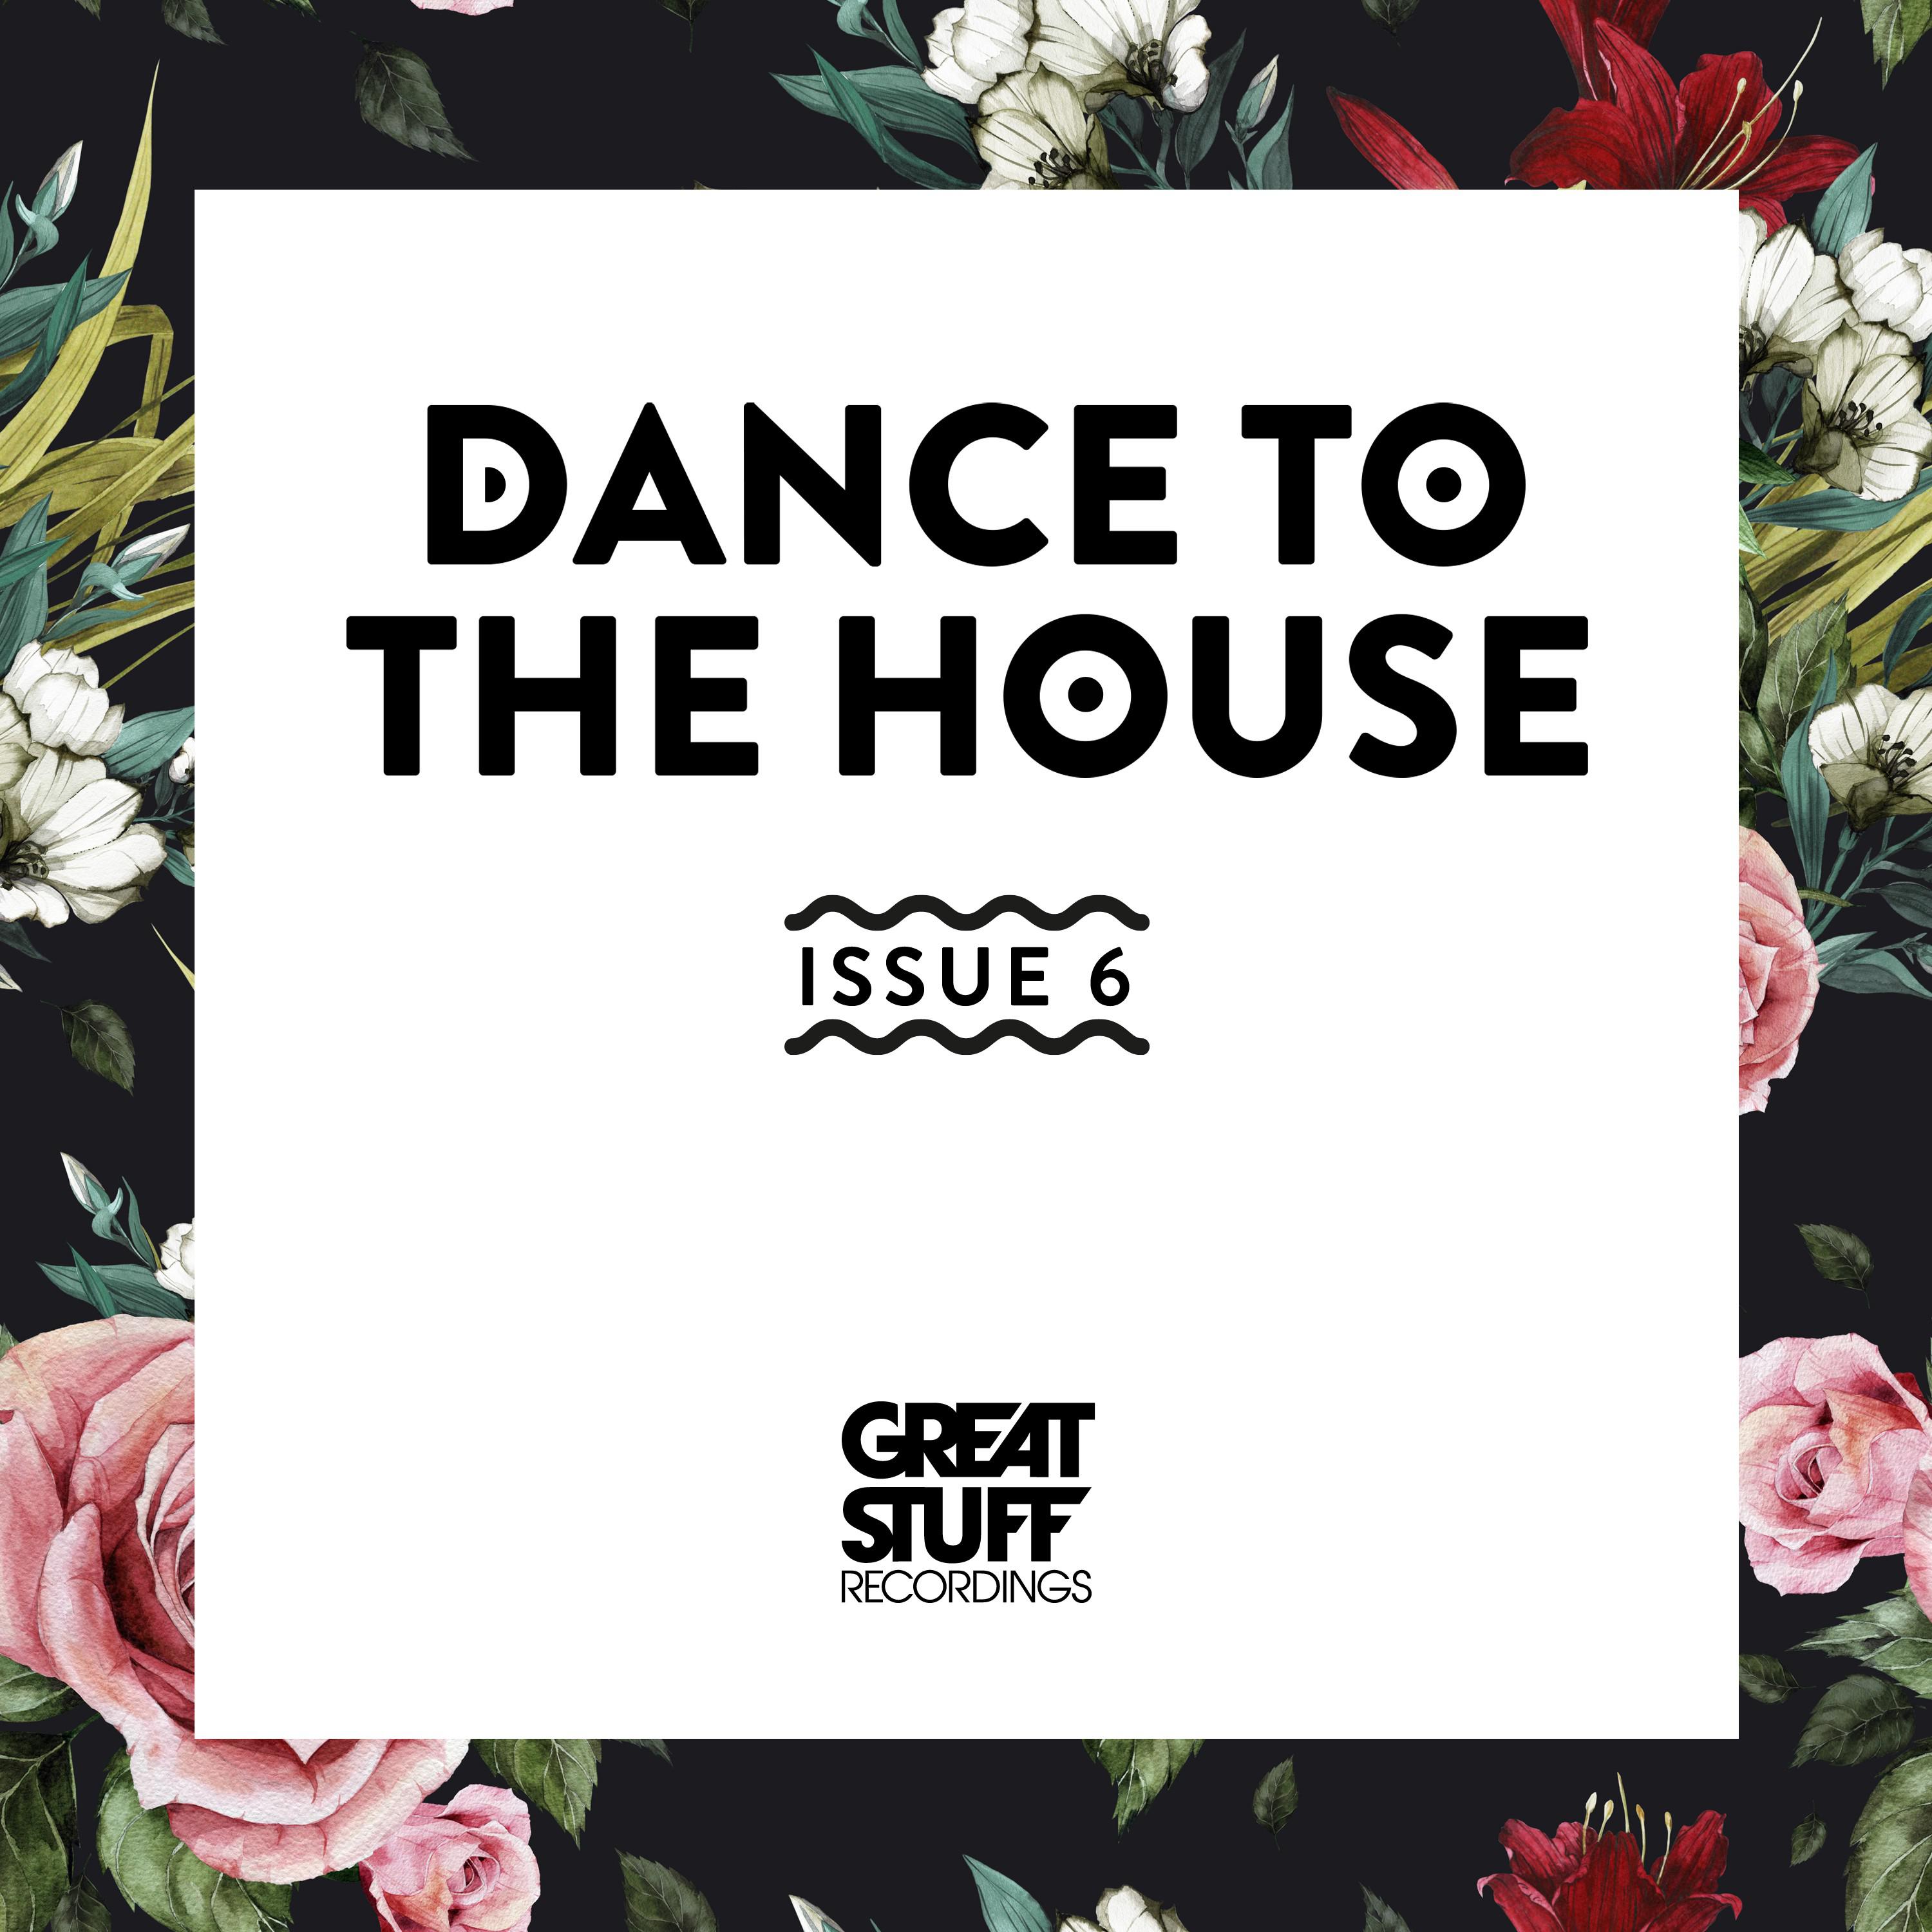 Dance to the House Issue 6